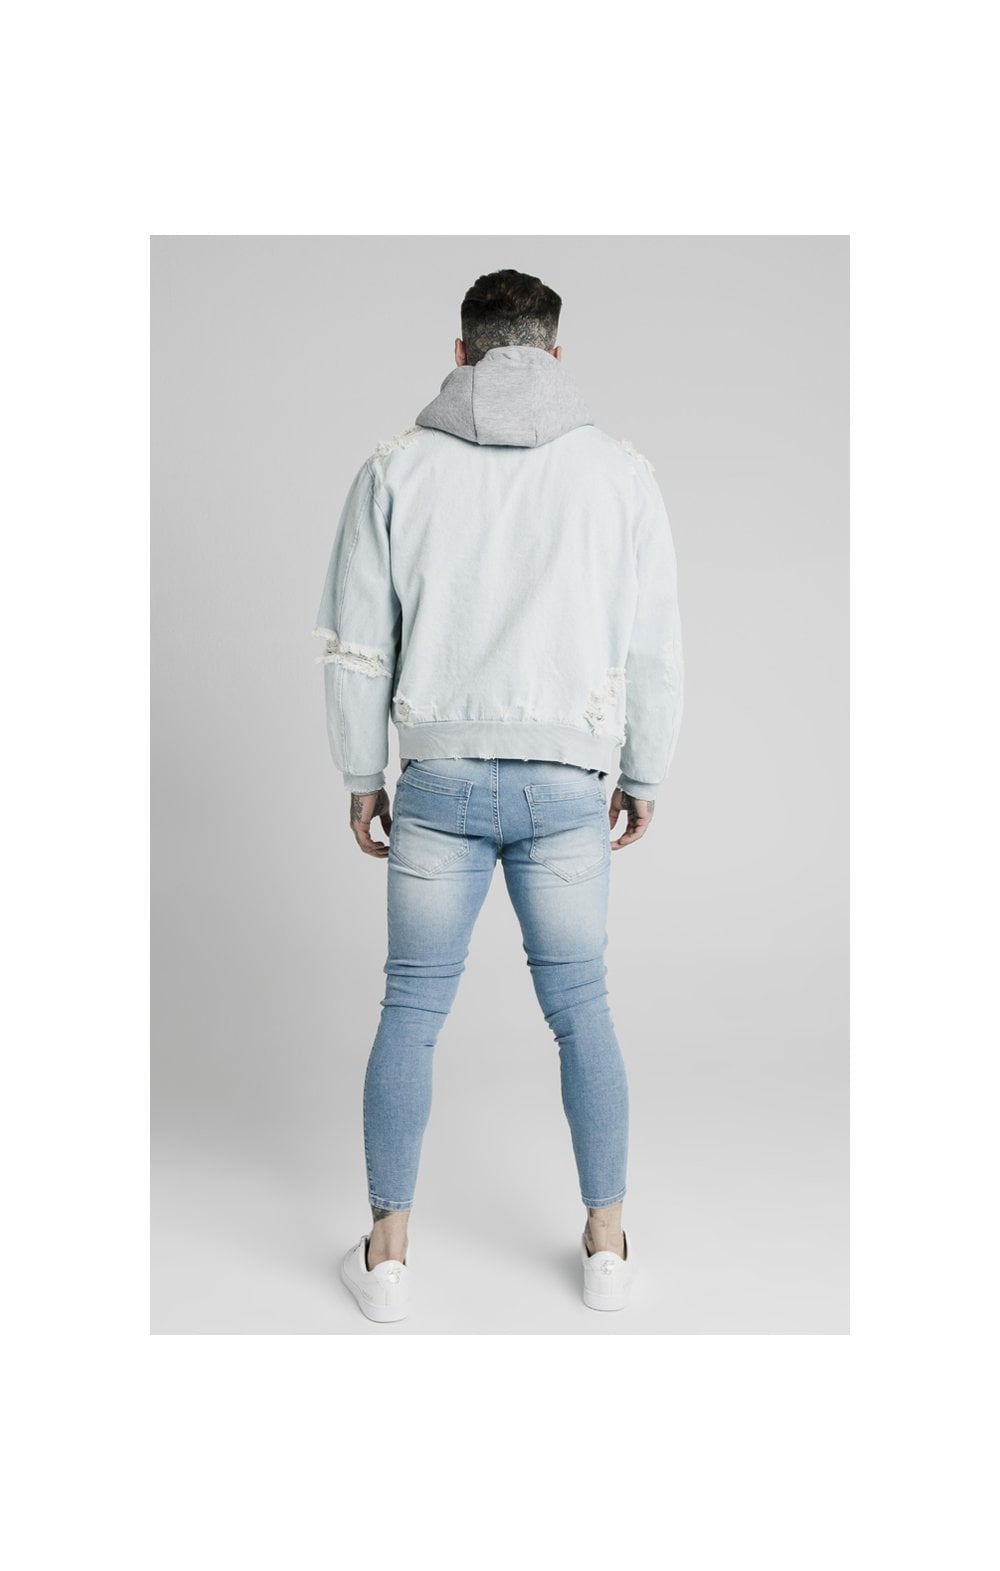 Load image into Gallery viewer, SikSilk Distressed Denim Bomber Jacket - Light Blue (5)